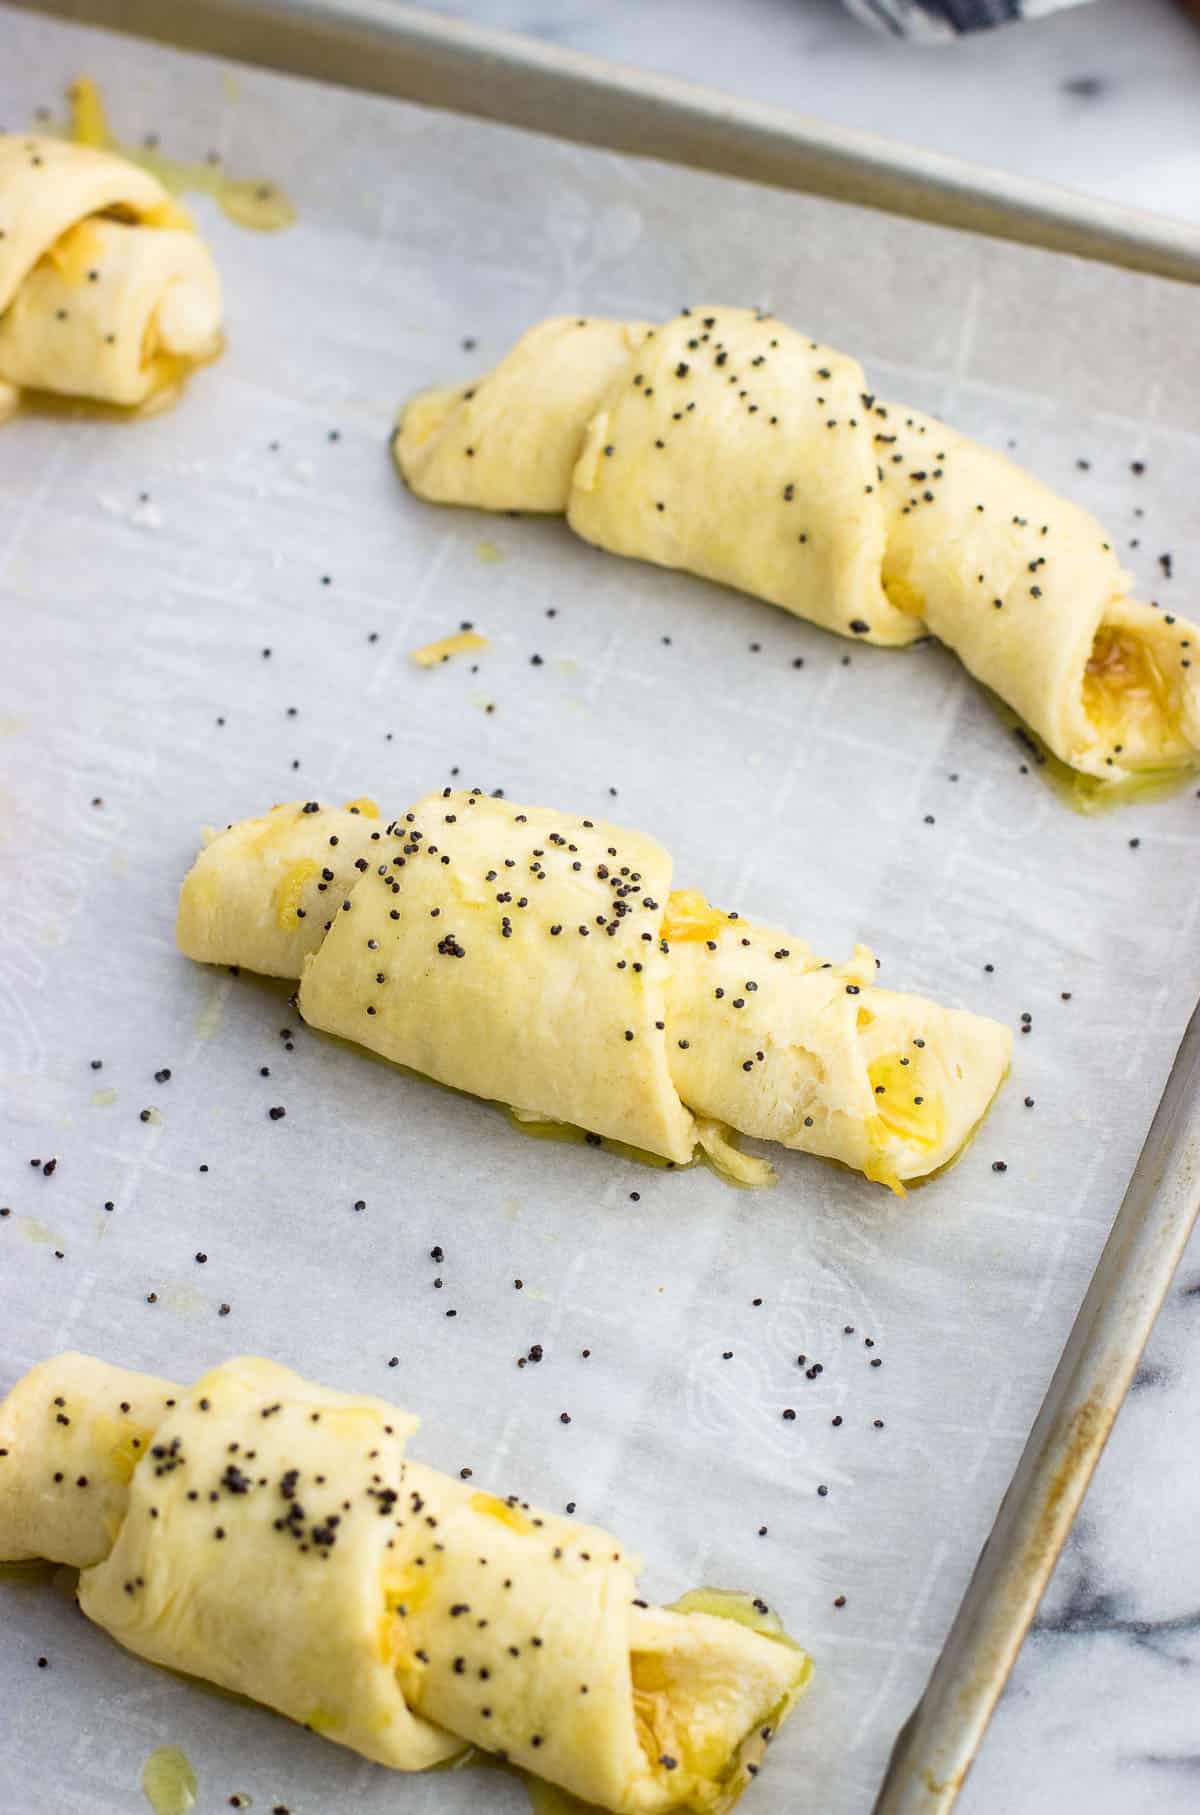 Rolled up crescent rolls topped with a brush of oil and poppy seeds on a baking sheet before being baked